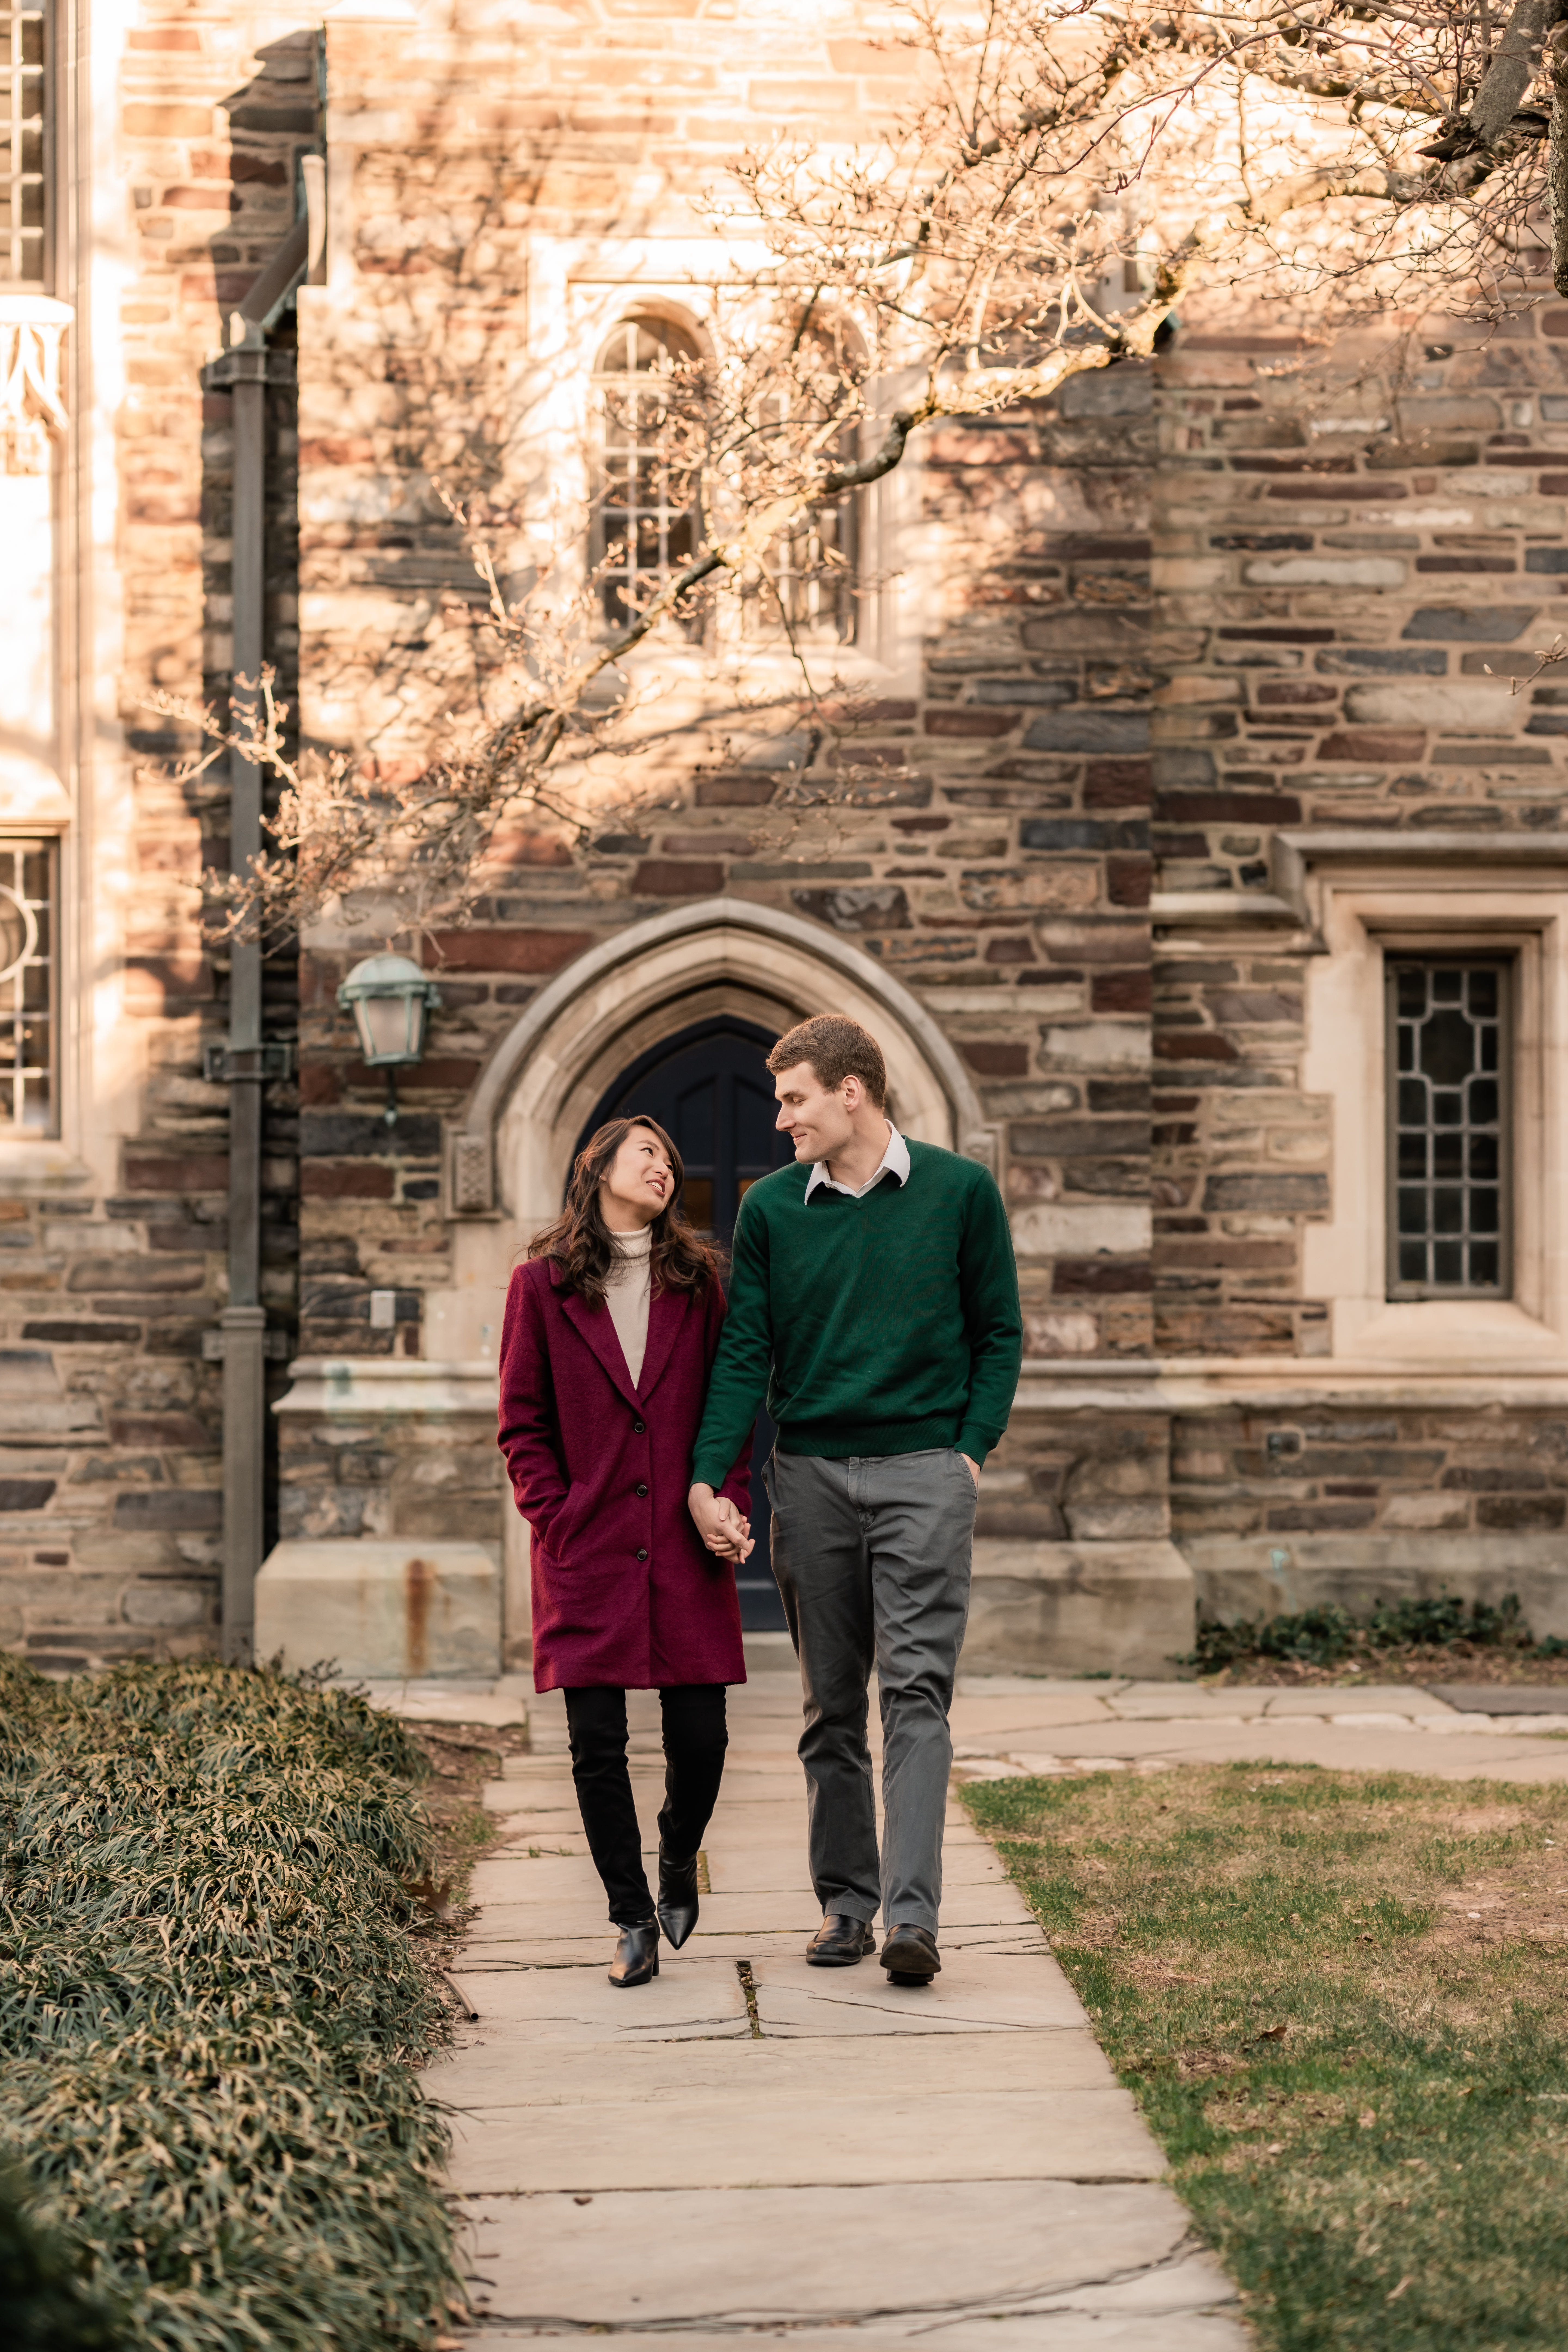 New Jersey Wedding Photographer, New Jersey Engagement Session, Princeton University Engagement Session, Princeton University Wedding Photographer, New Jersey Wedding Venues, NJ Wedding Photographer, Unique Wedding Ideas, Princeton University, Modern Wedding Couple, Wedding Inspiration, Wedding Planning, Princeton NJ, couple walking hand and hand away from a university building while smiling and looking at each other 